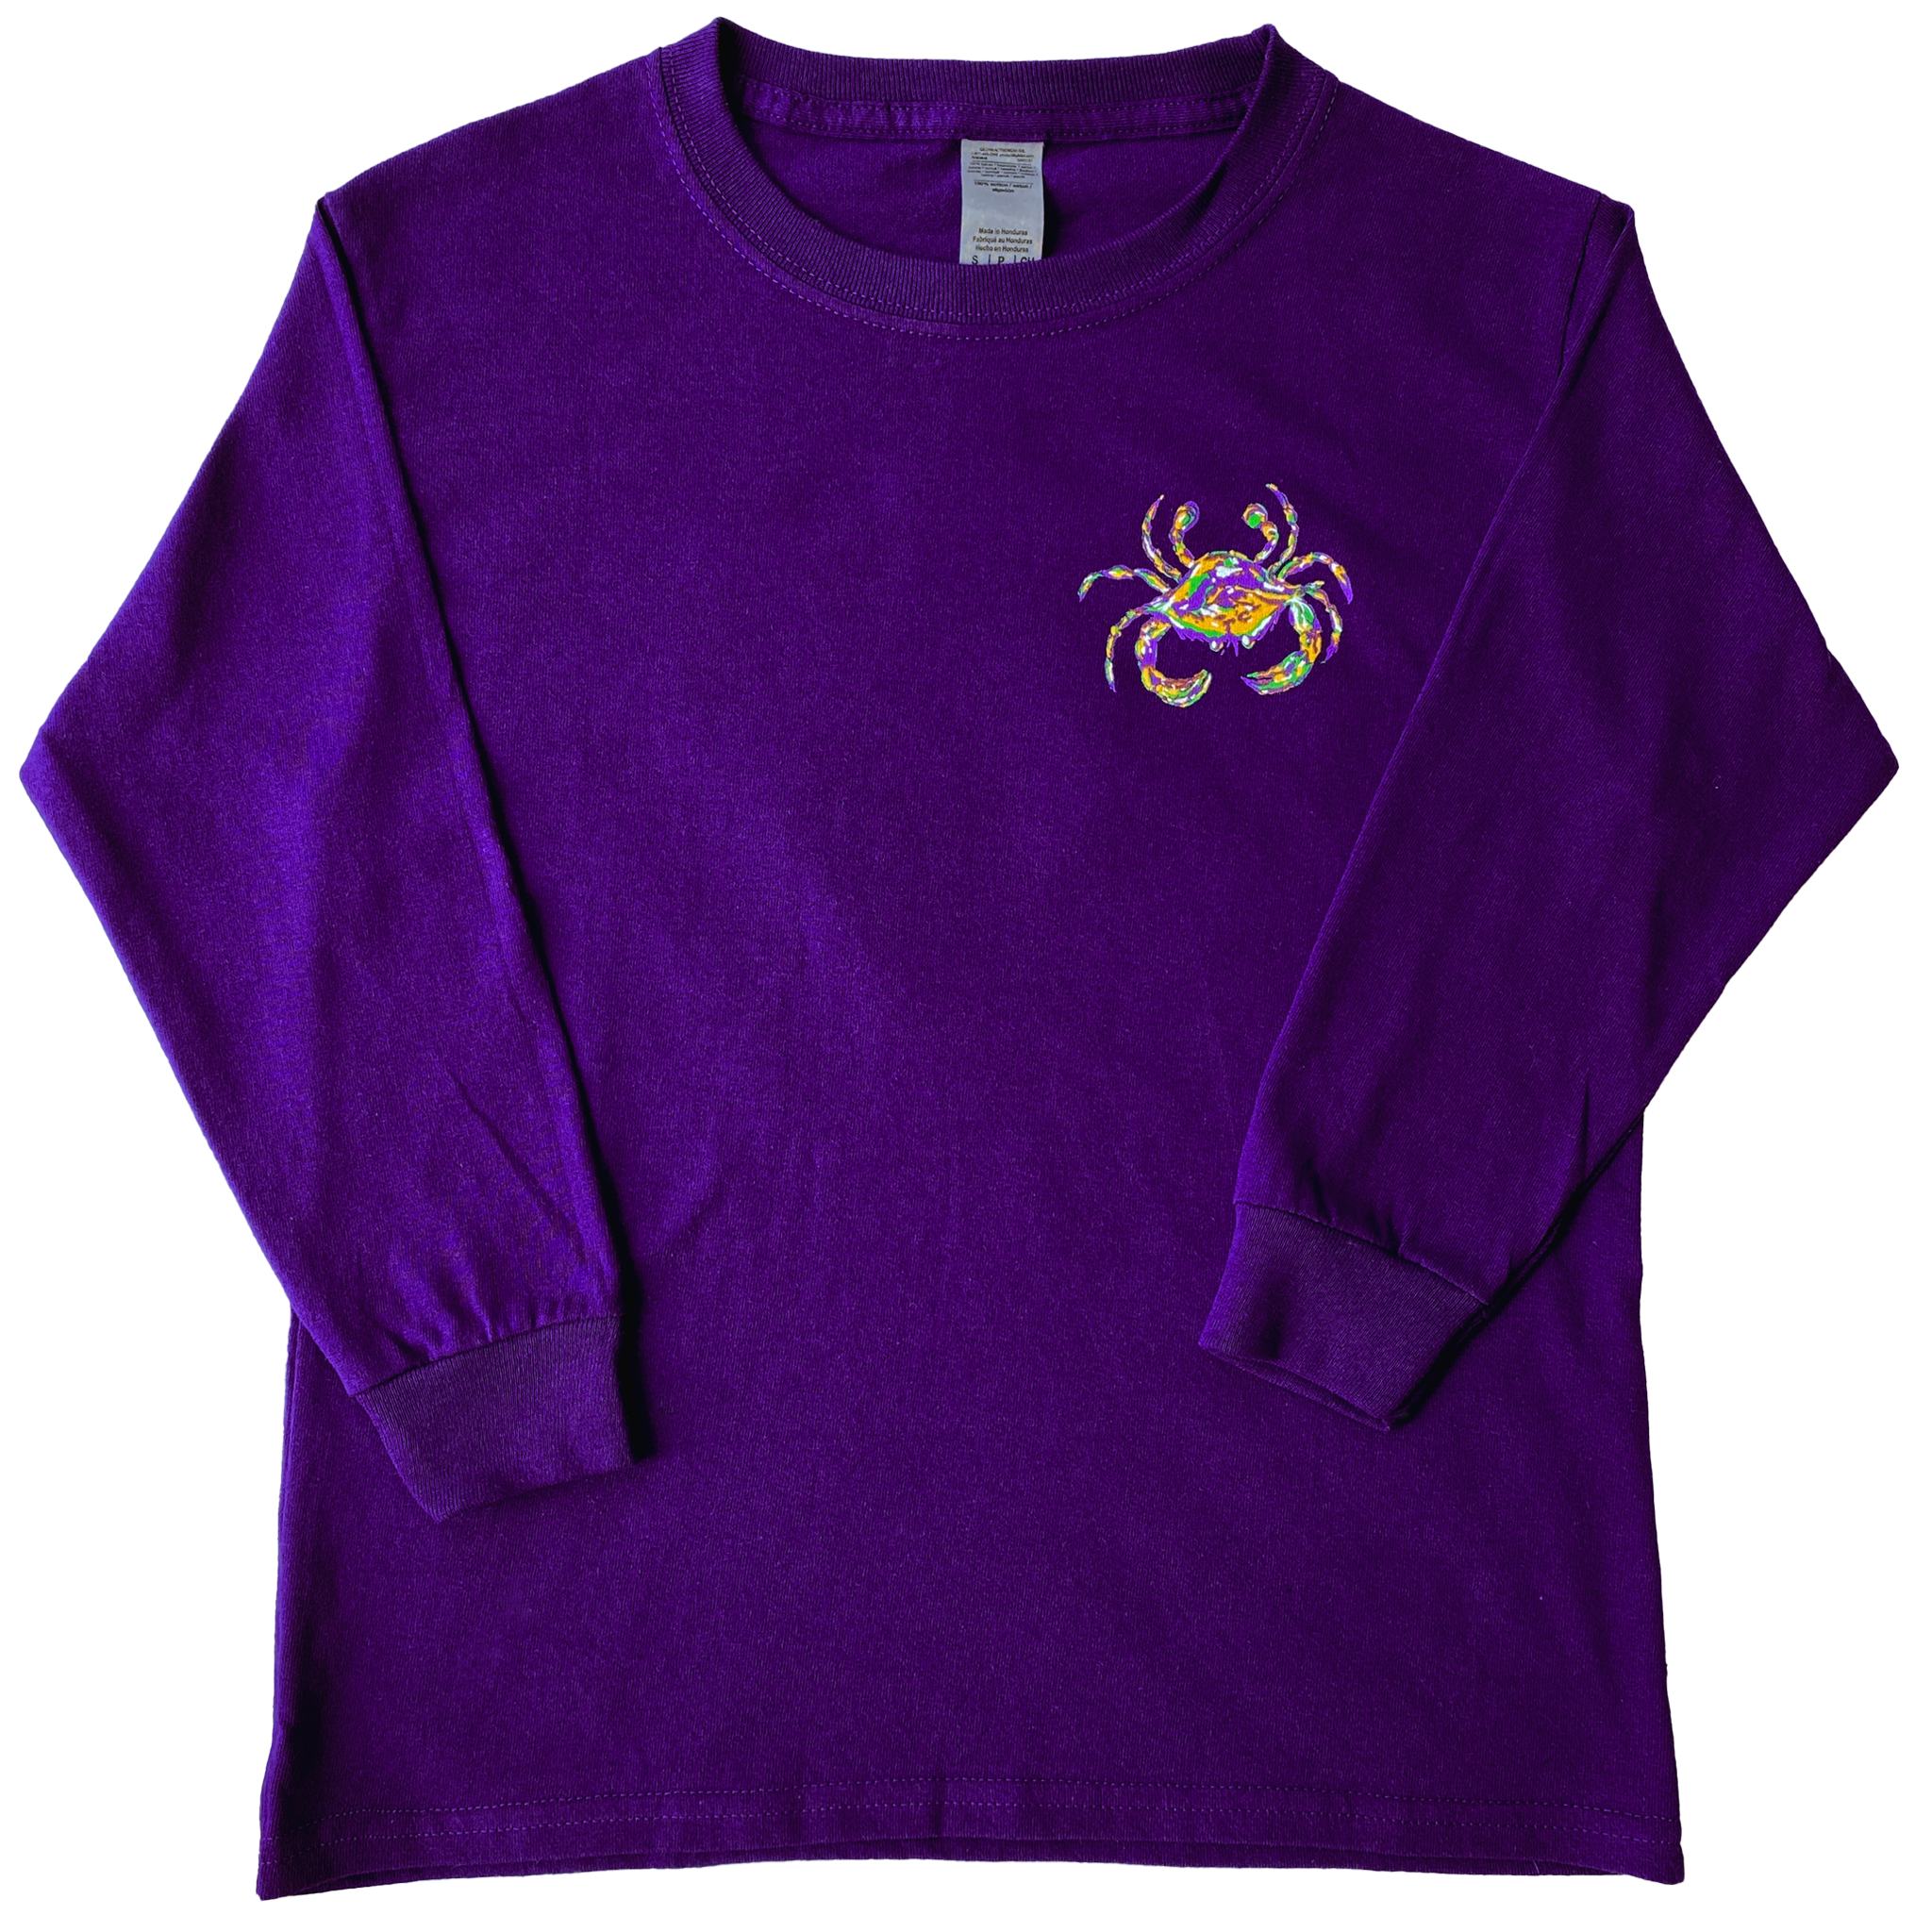 A deep purple t-shirt with long sleeves, a crew neck, and a crab on the left chest.